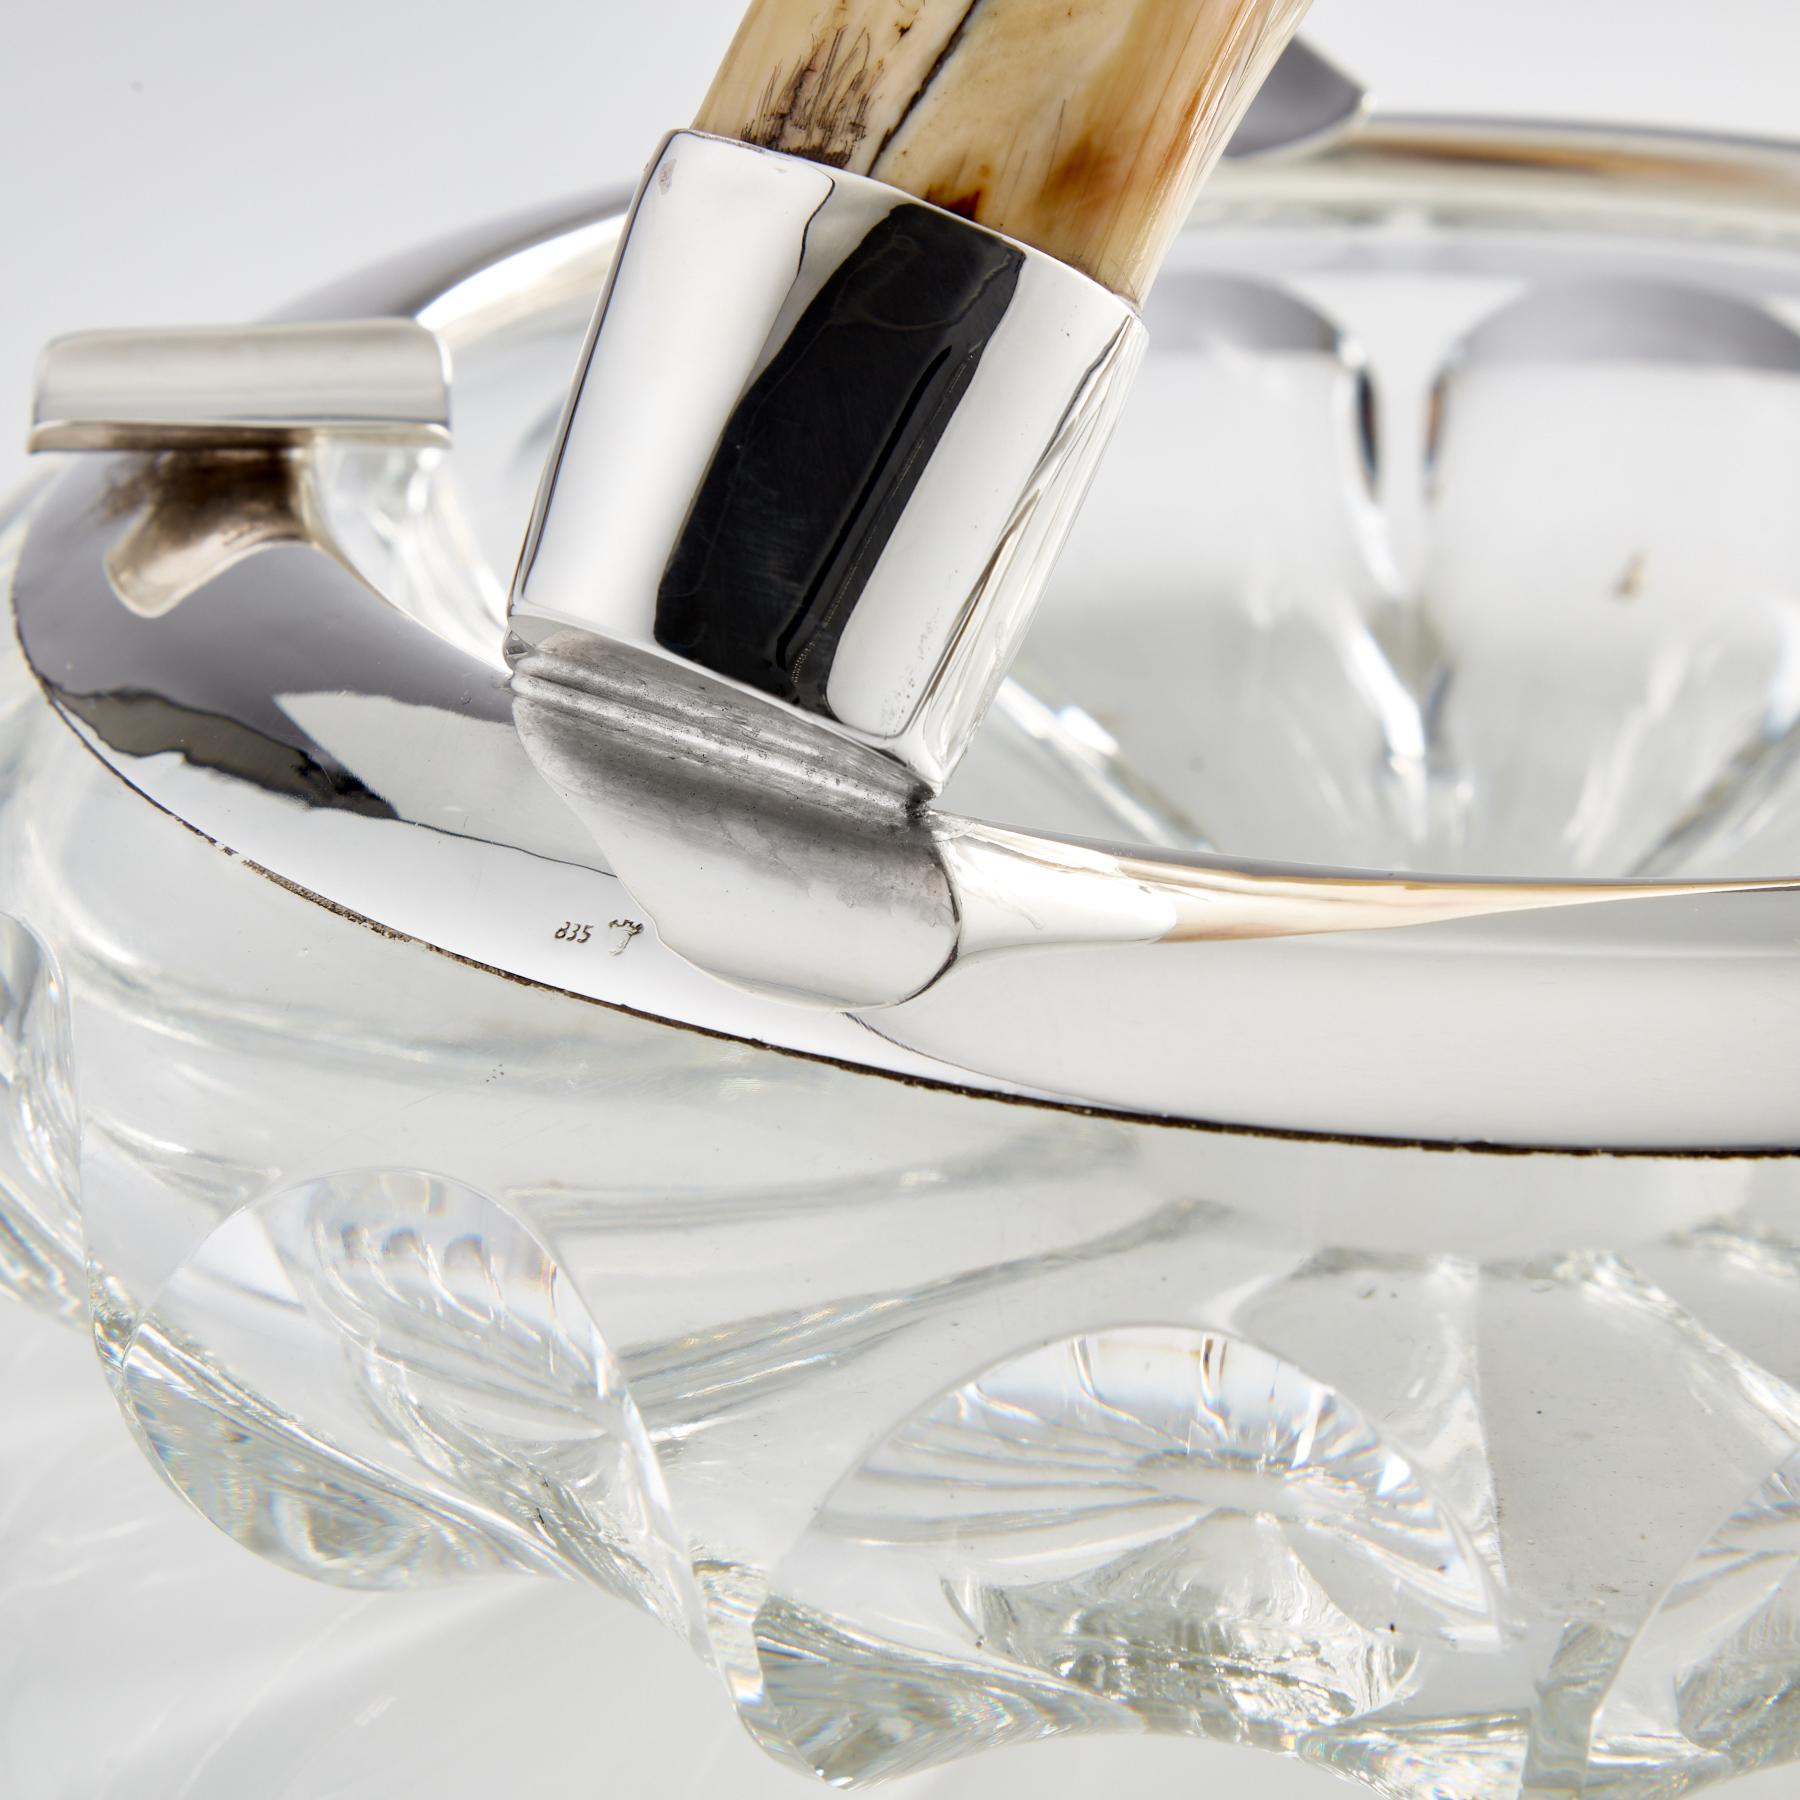 Early 20th Century Large Glass and Silver Cigar Ashtray with Boars Tooth Handle, German, circa 1910